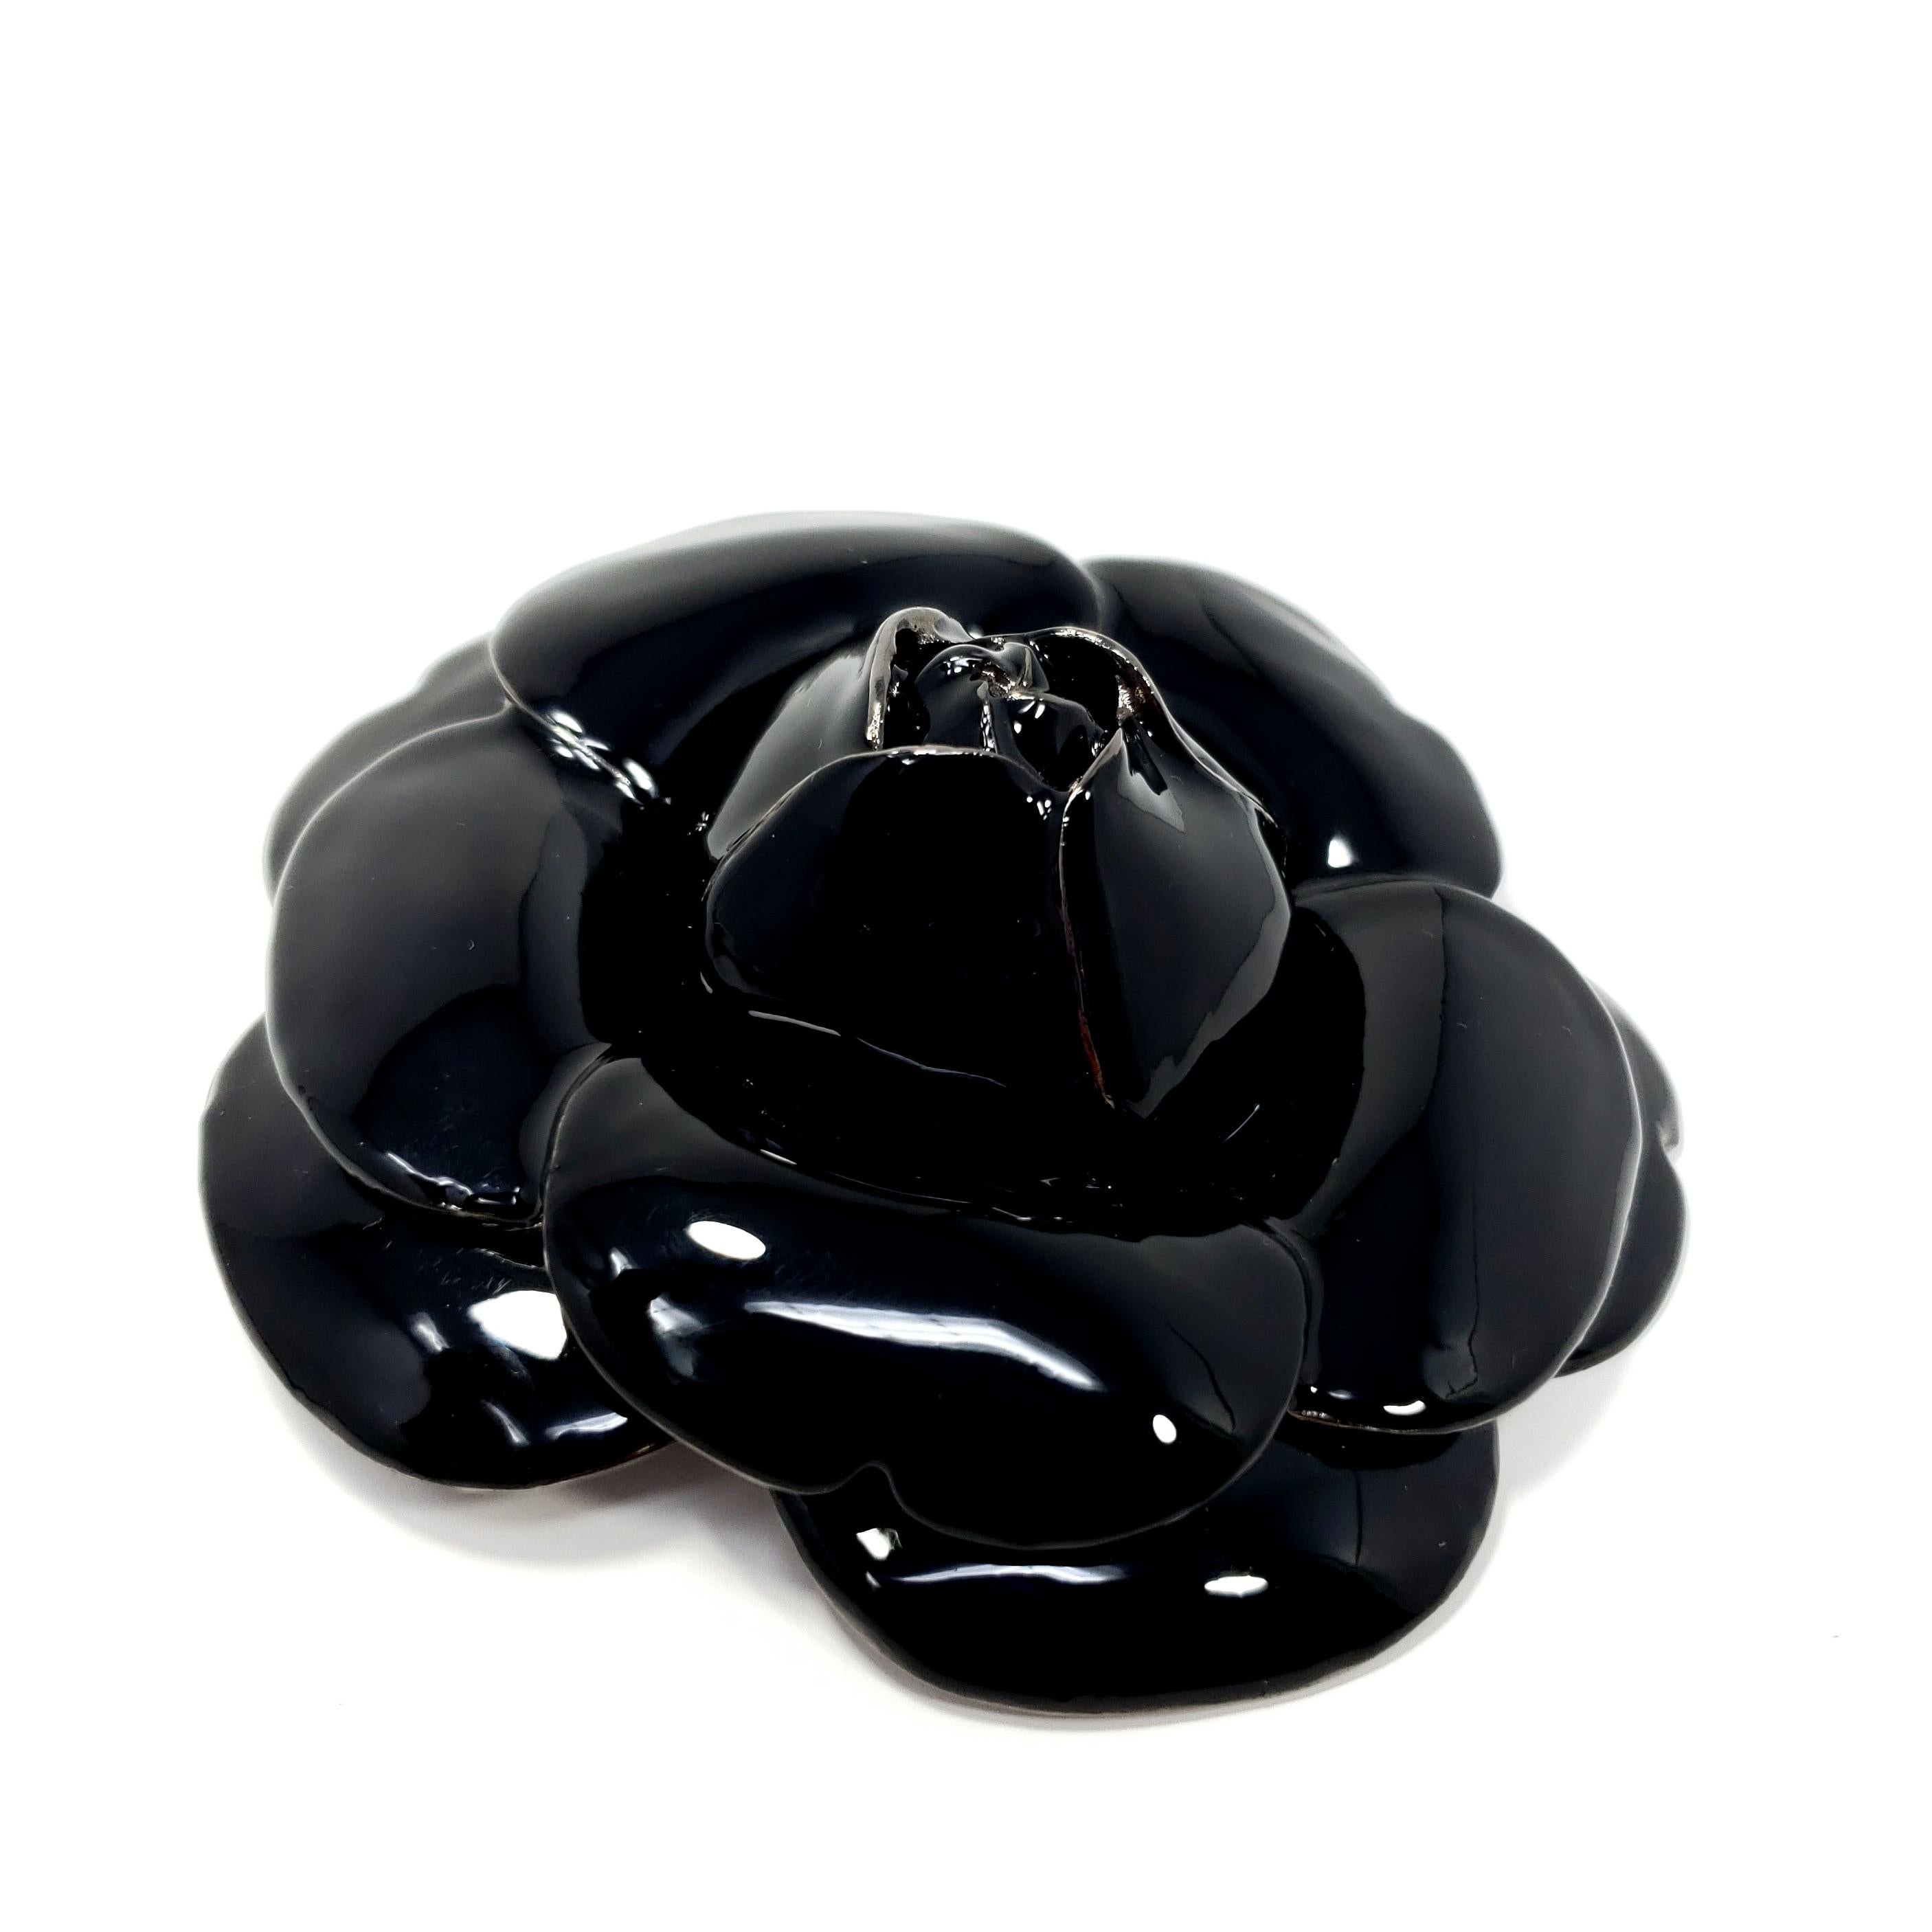 Best in black! You've always been a stunner, now get a brooch to match it! Large impressive Oscar de la Renta brooch pin in reflective black enamel.

Please keep in mind this brooch is heavy and is not fit to hang from thin or delicate clothing.